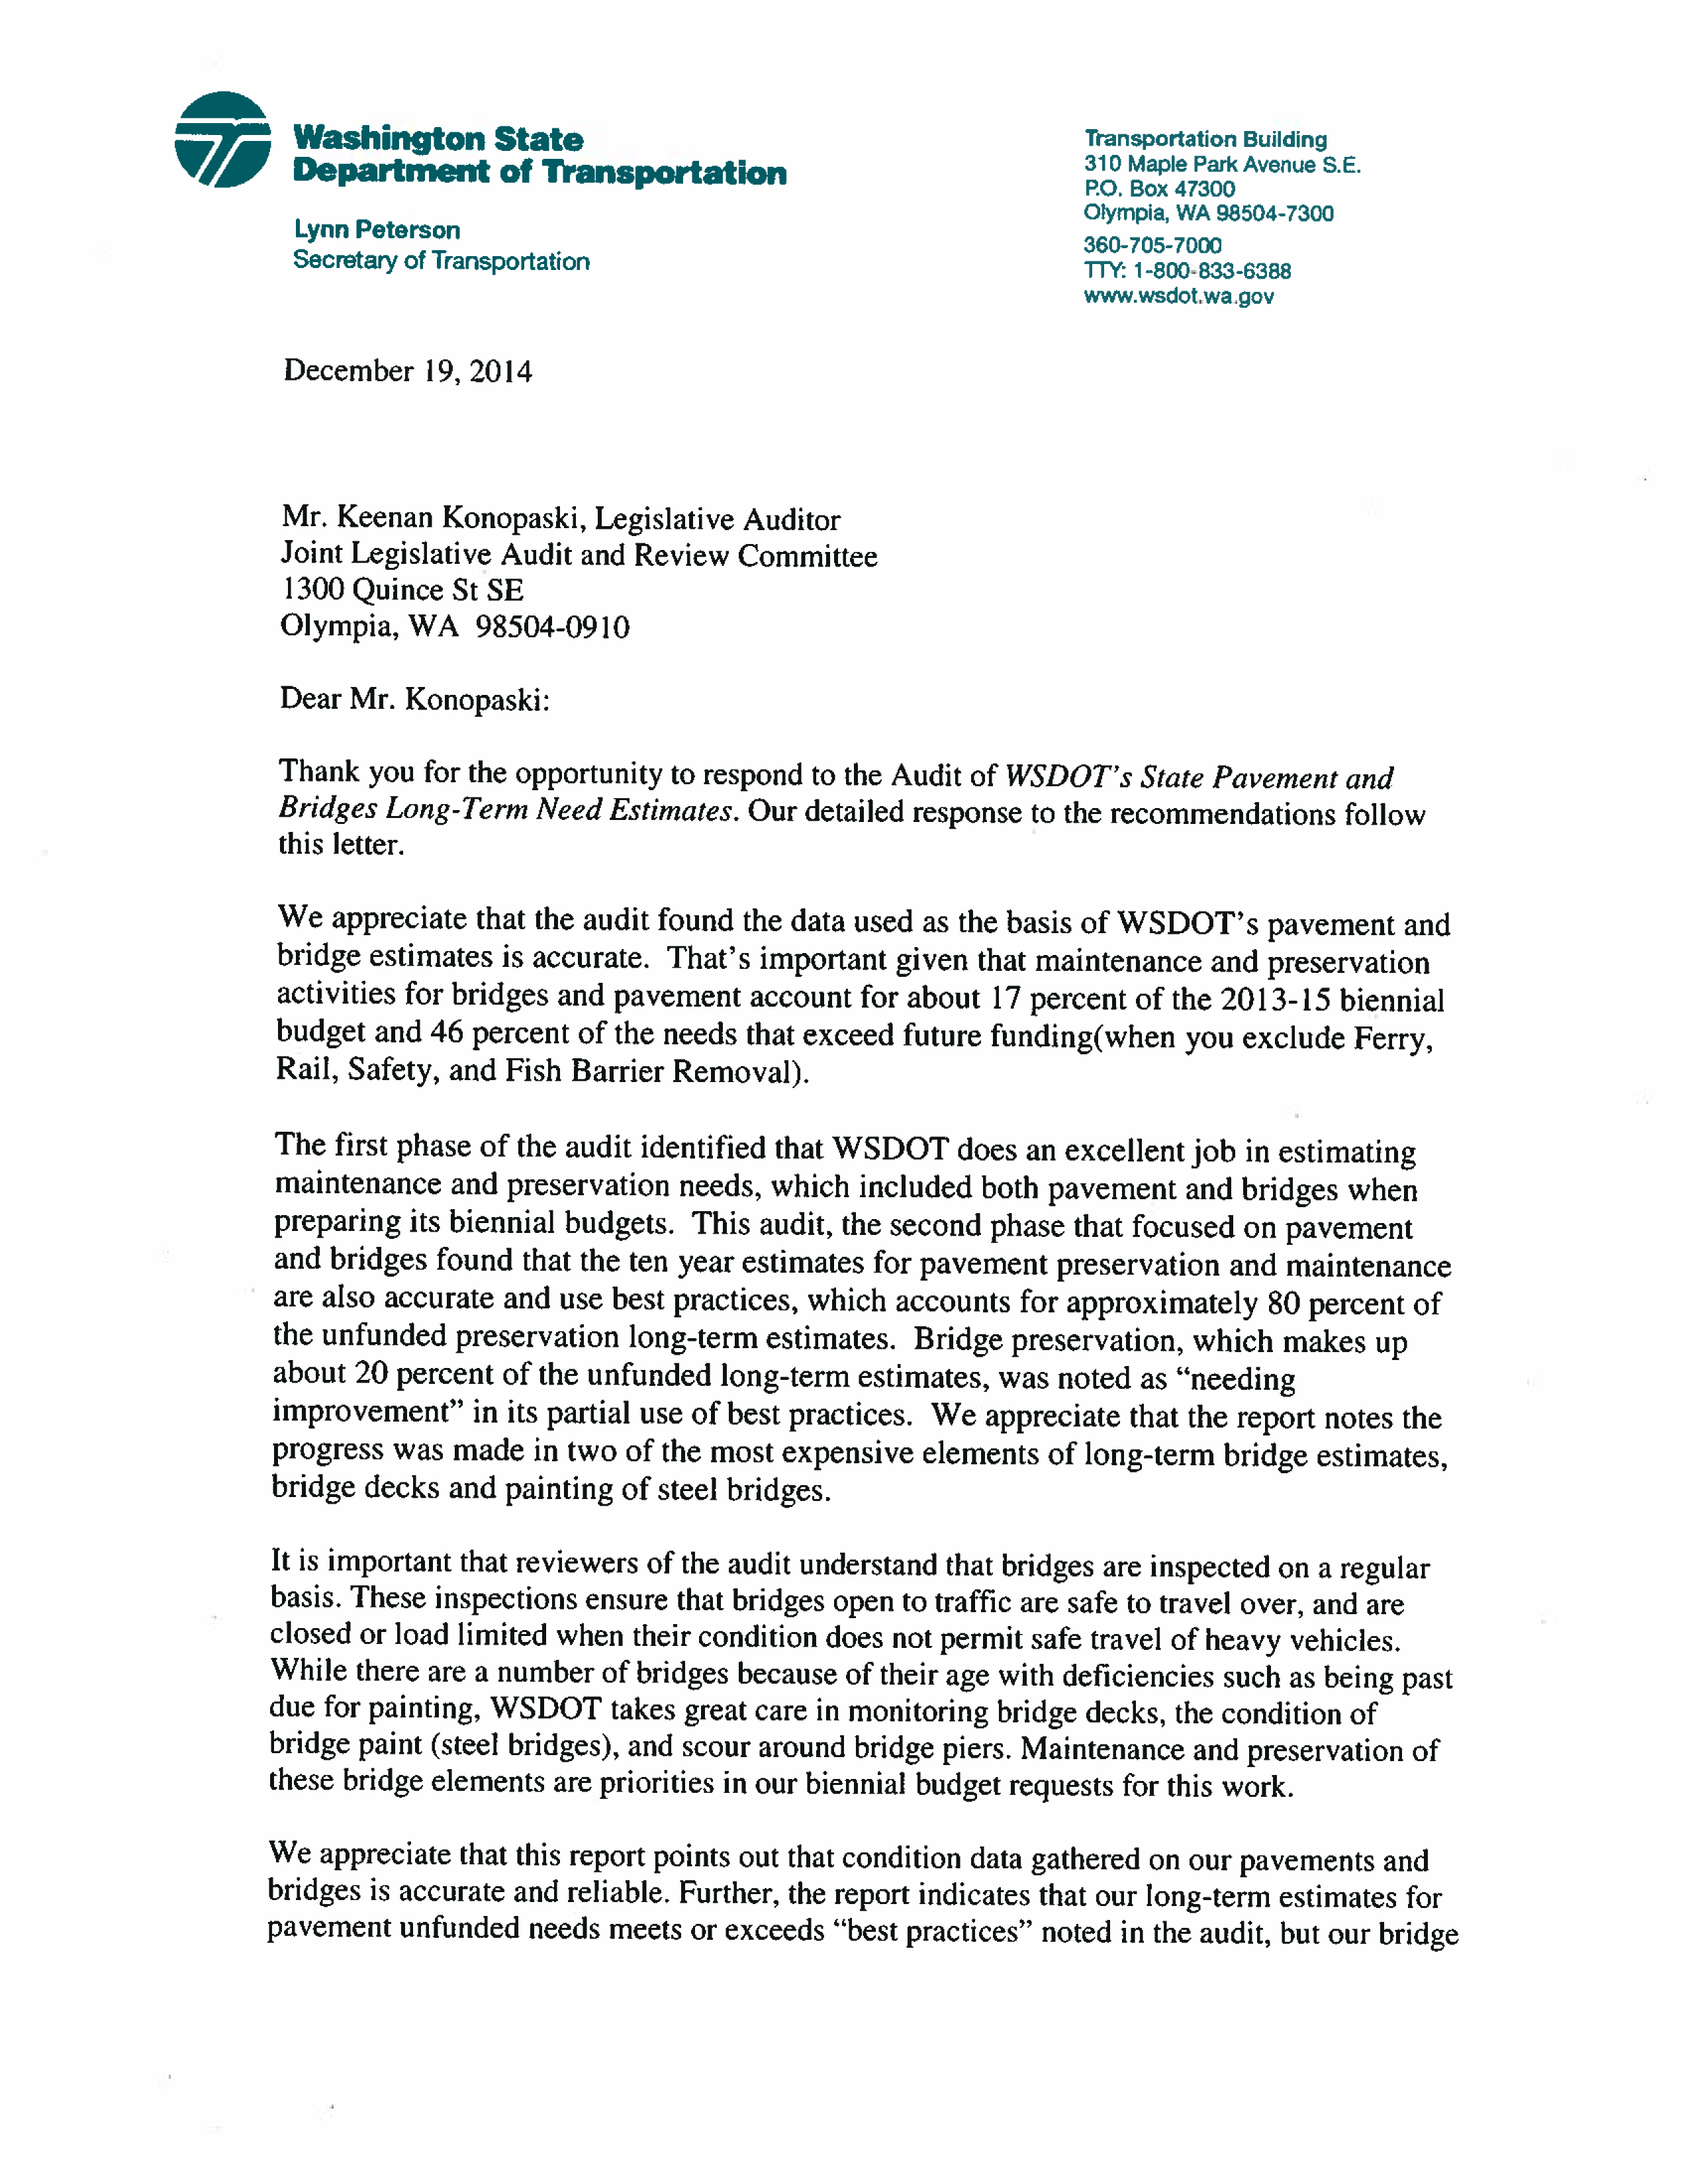 WSDOT response letter page one. 